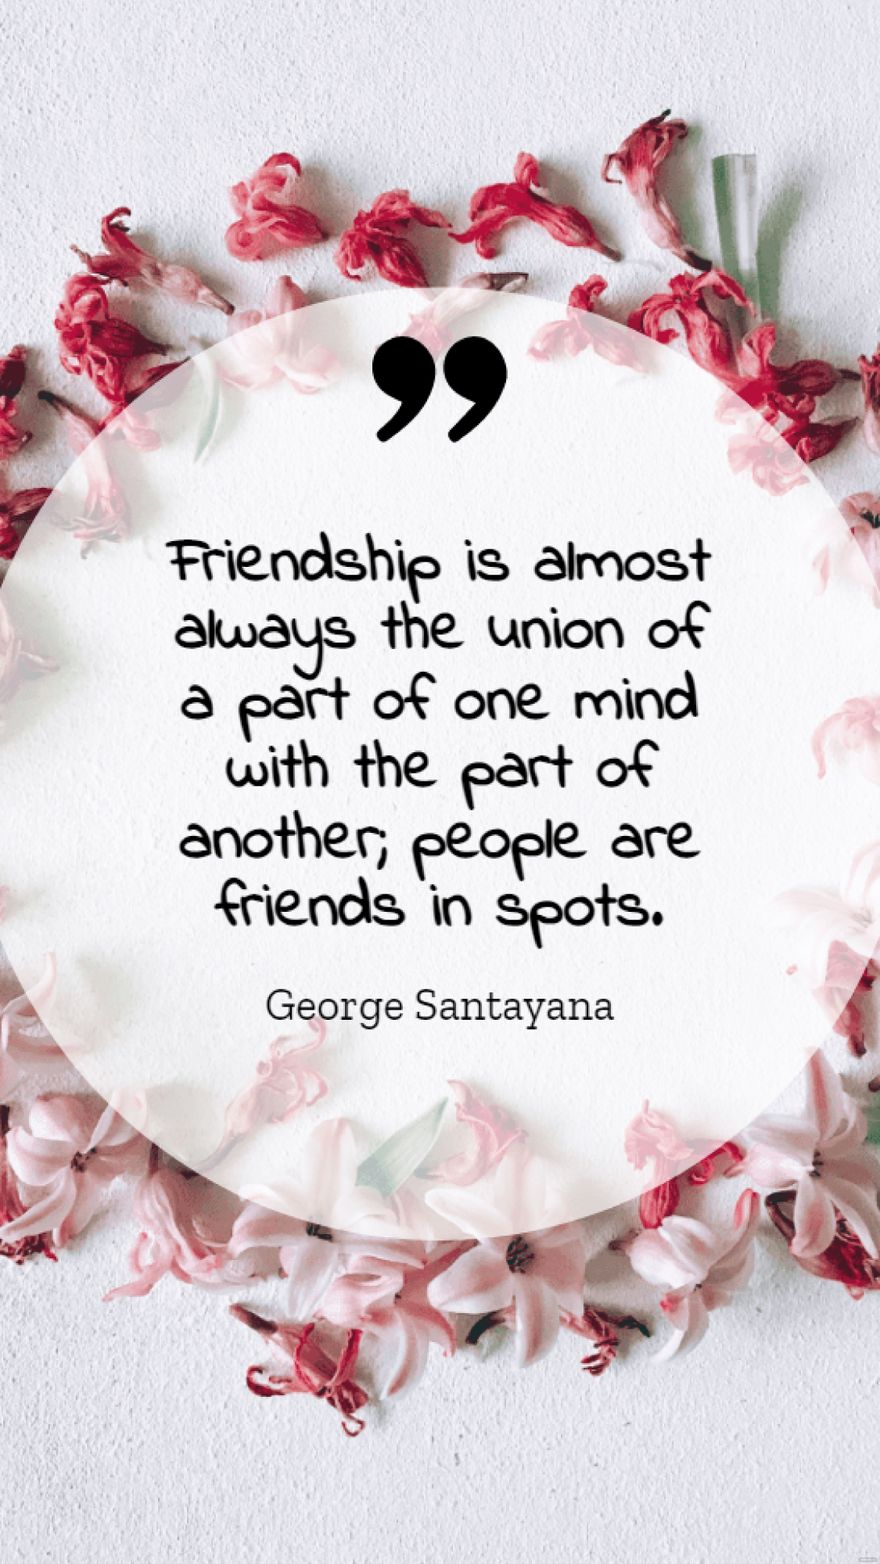 George Santayana  Friendship is almost always the union of a part of one mind with the part of another people are friends in spots